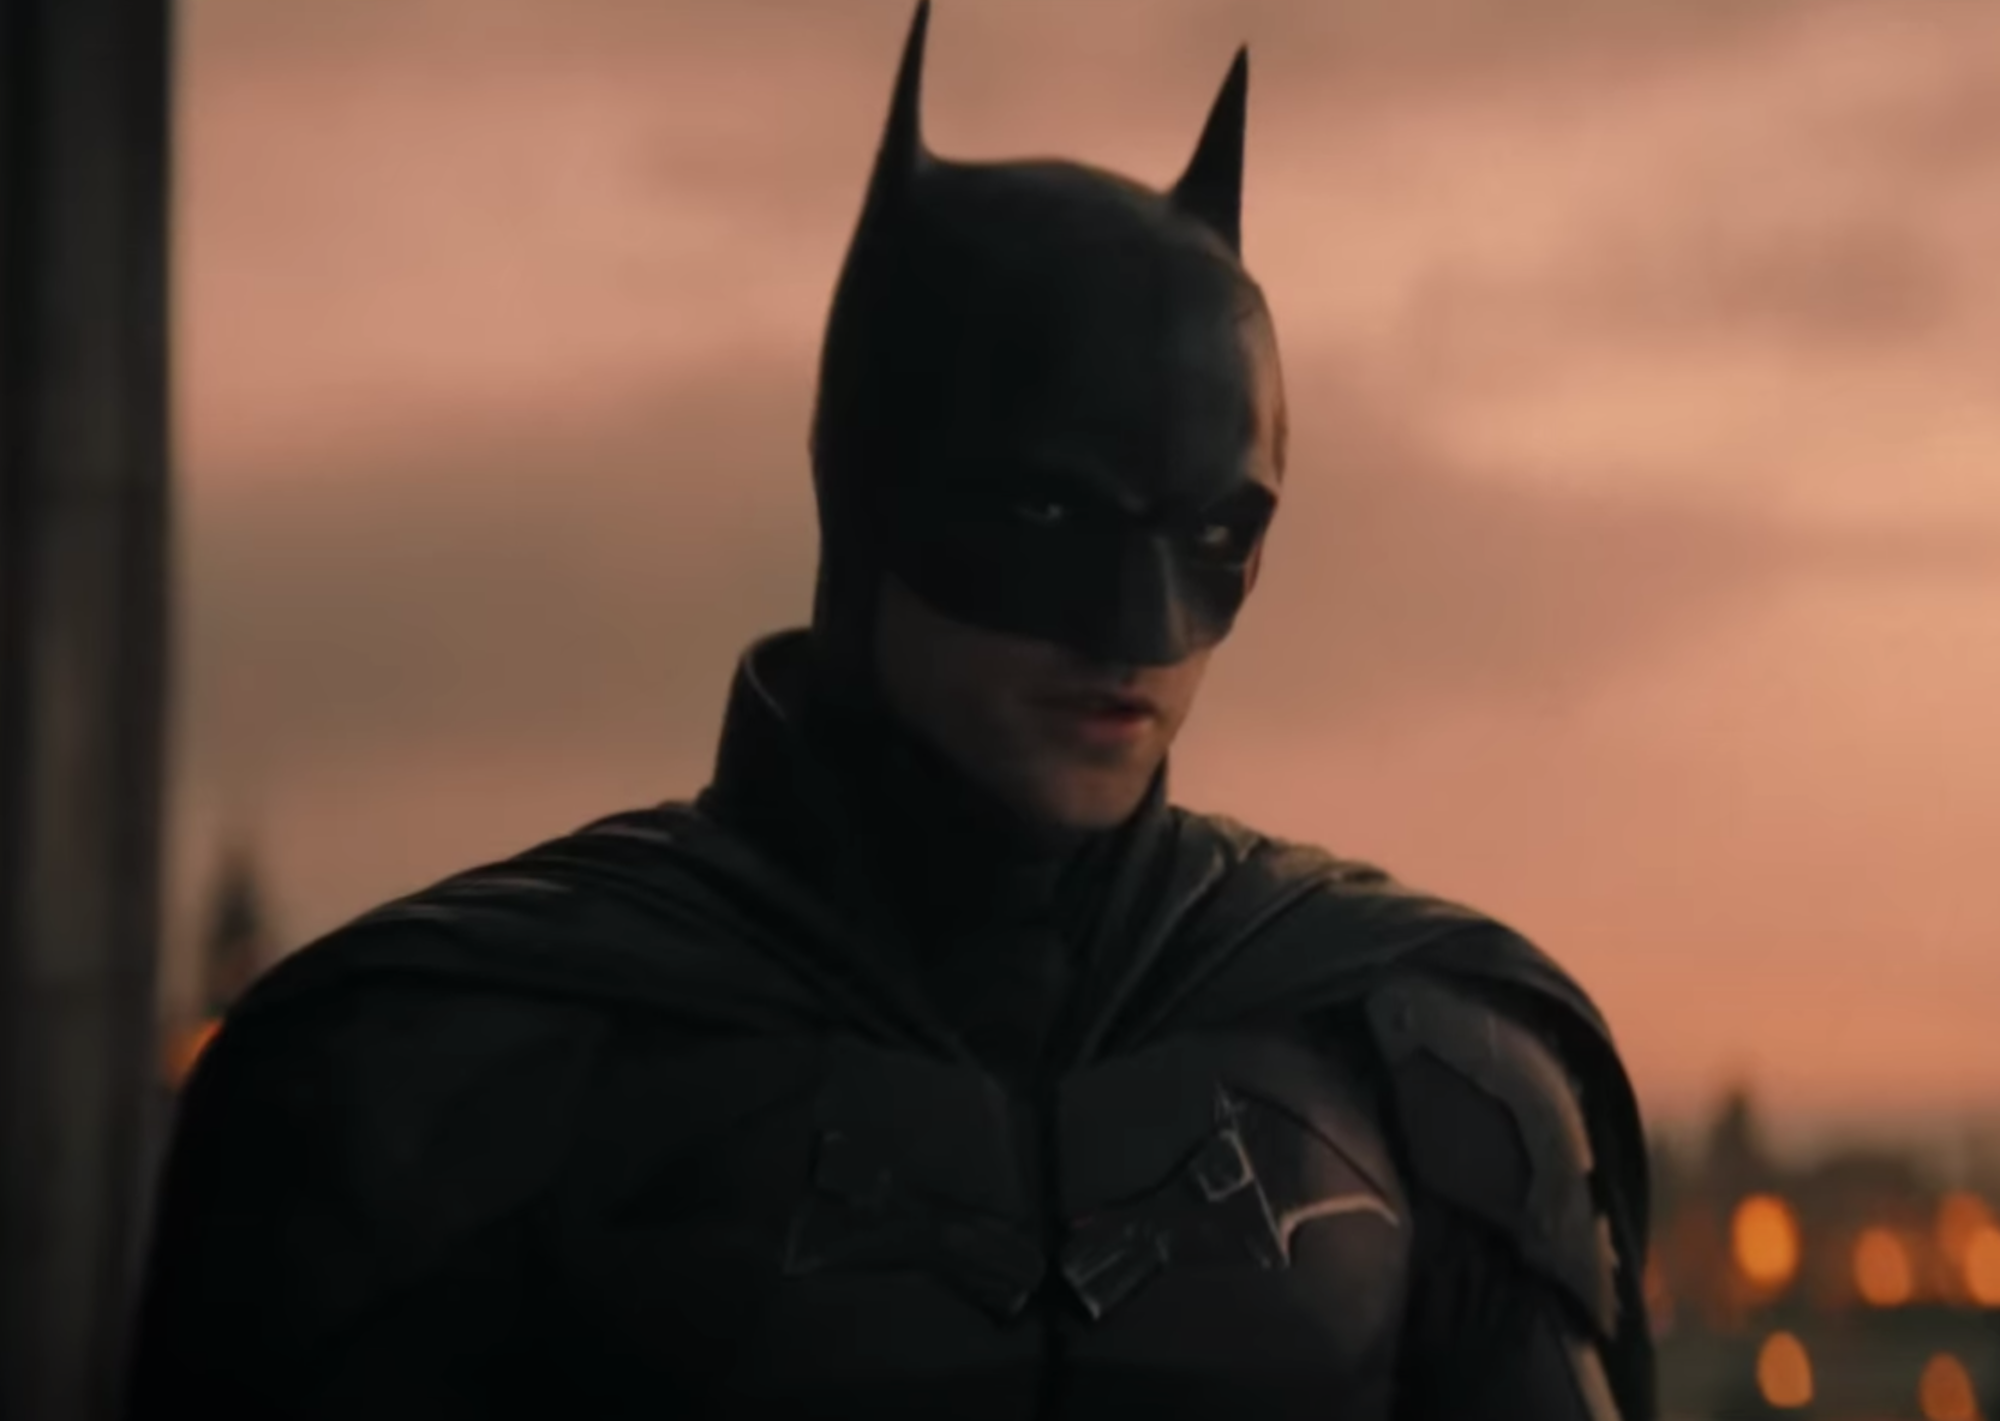 Every Batman Movie in Order and Where to Watch Them